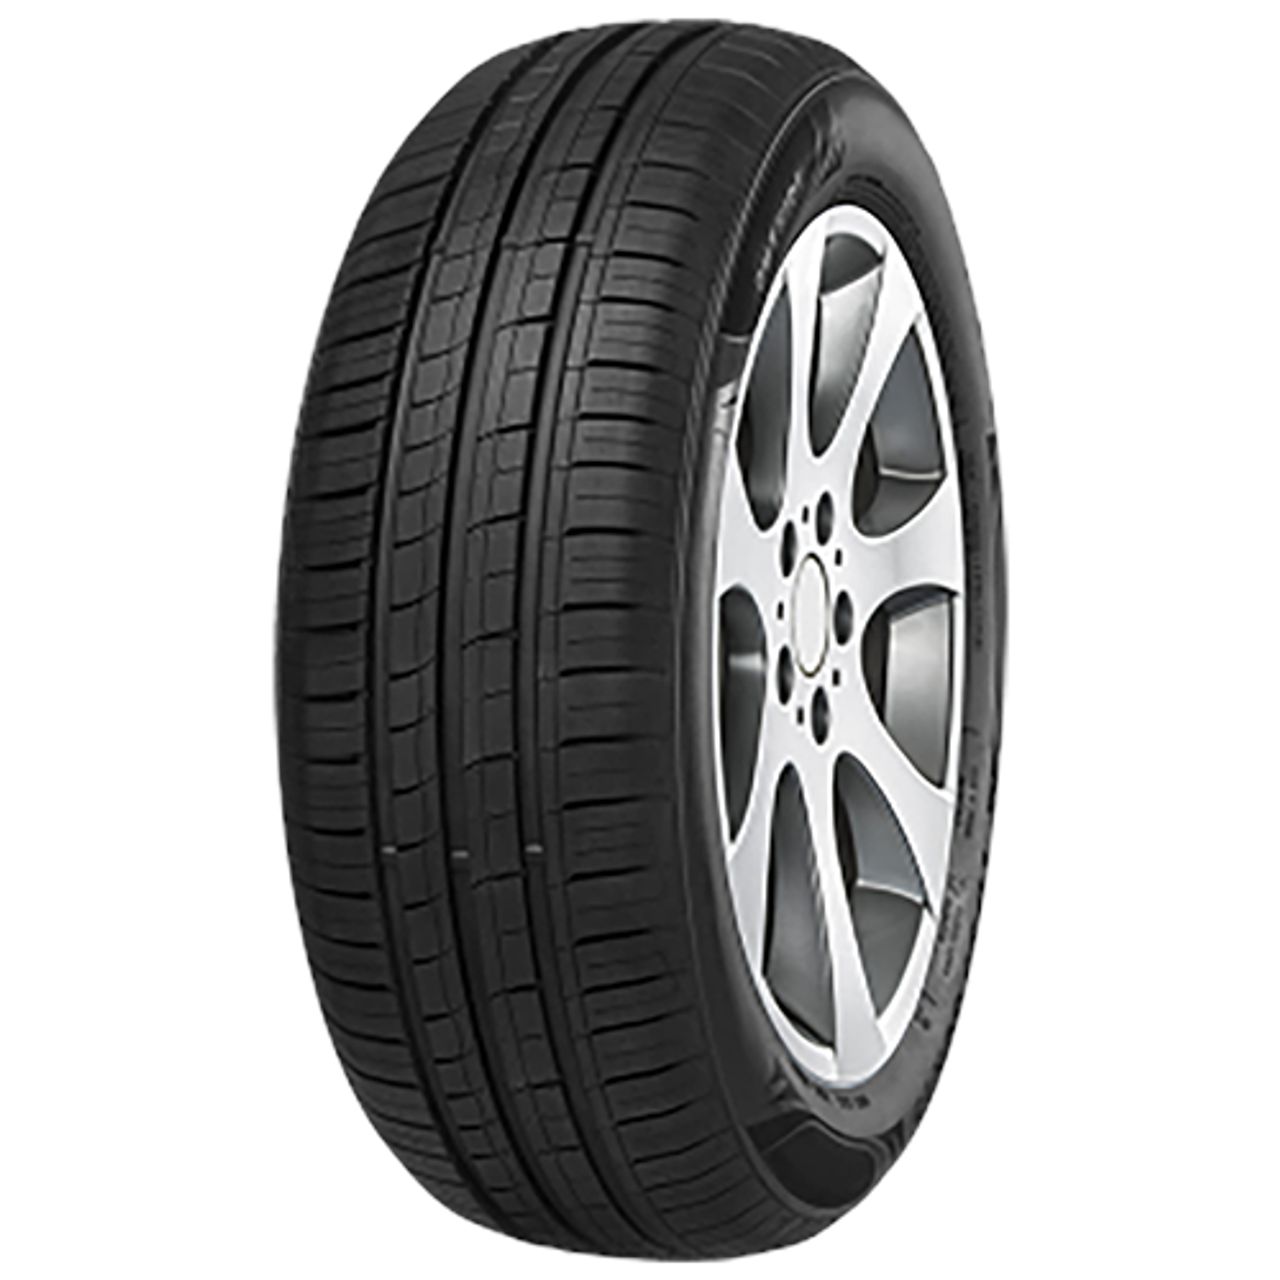 IMPERIAL ECODRIVER 4 175/70R14 88T